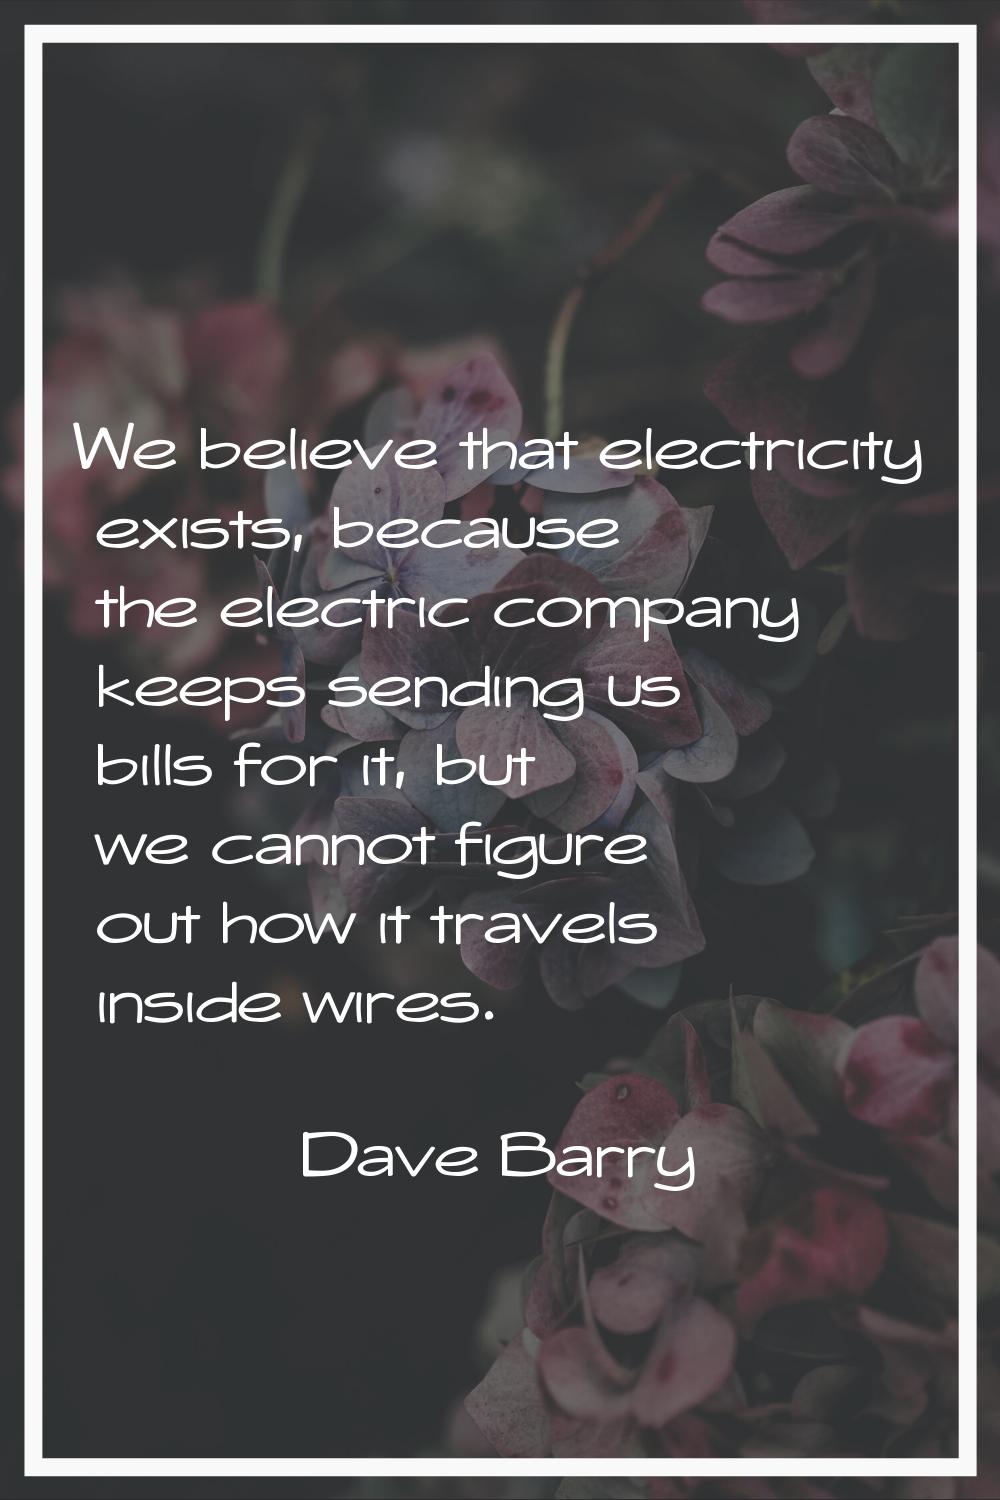 We believe that electricity exists, because the electric company keeps sending us bills for it, but